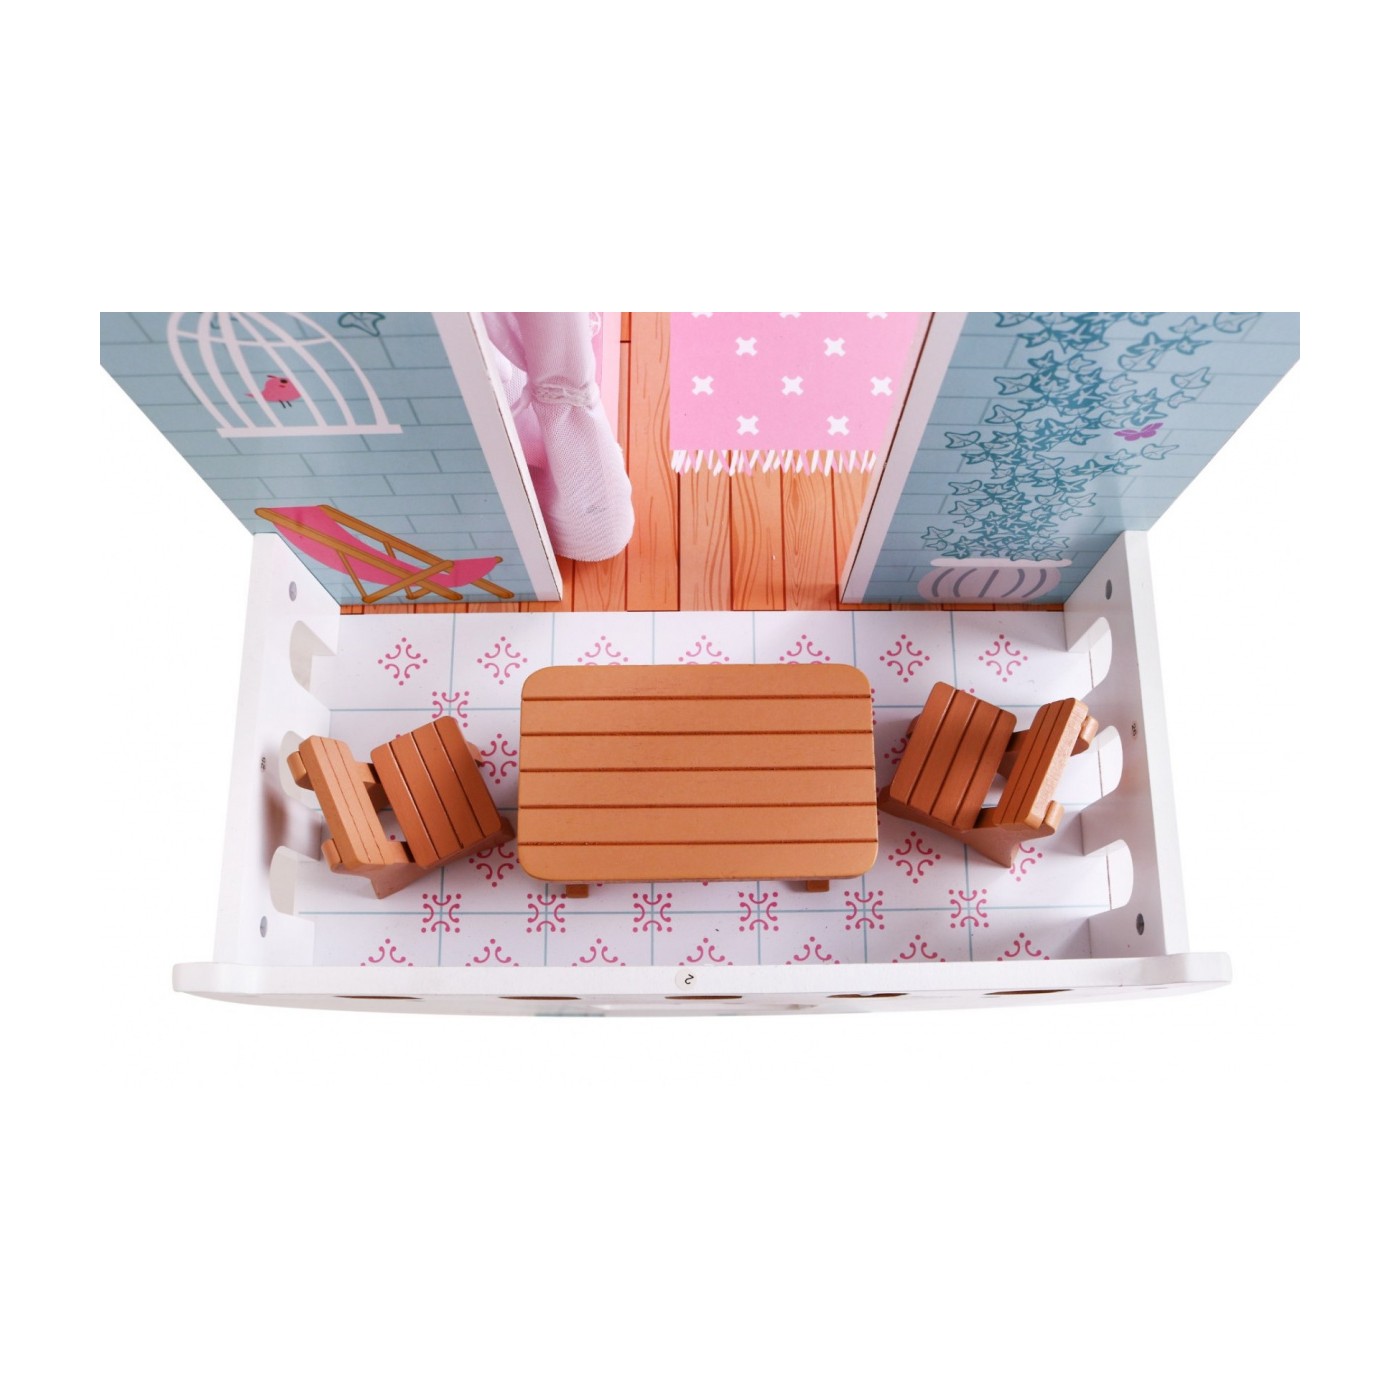 Dollhouse Wood Accessories